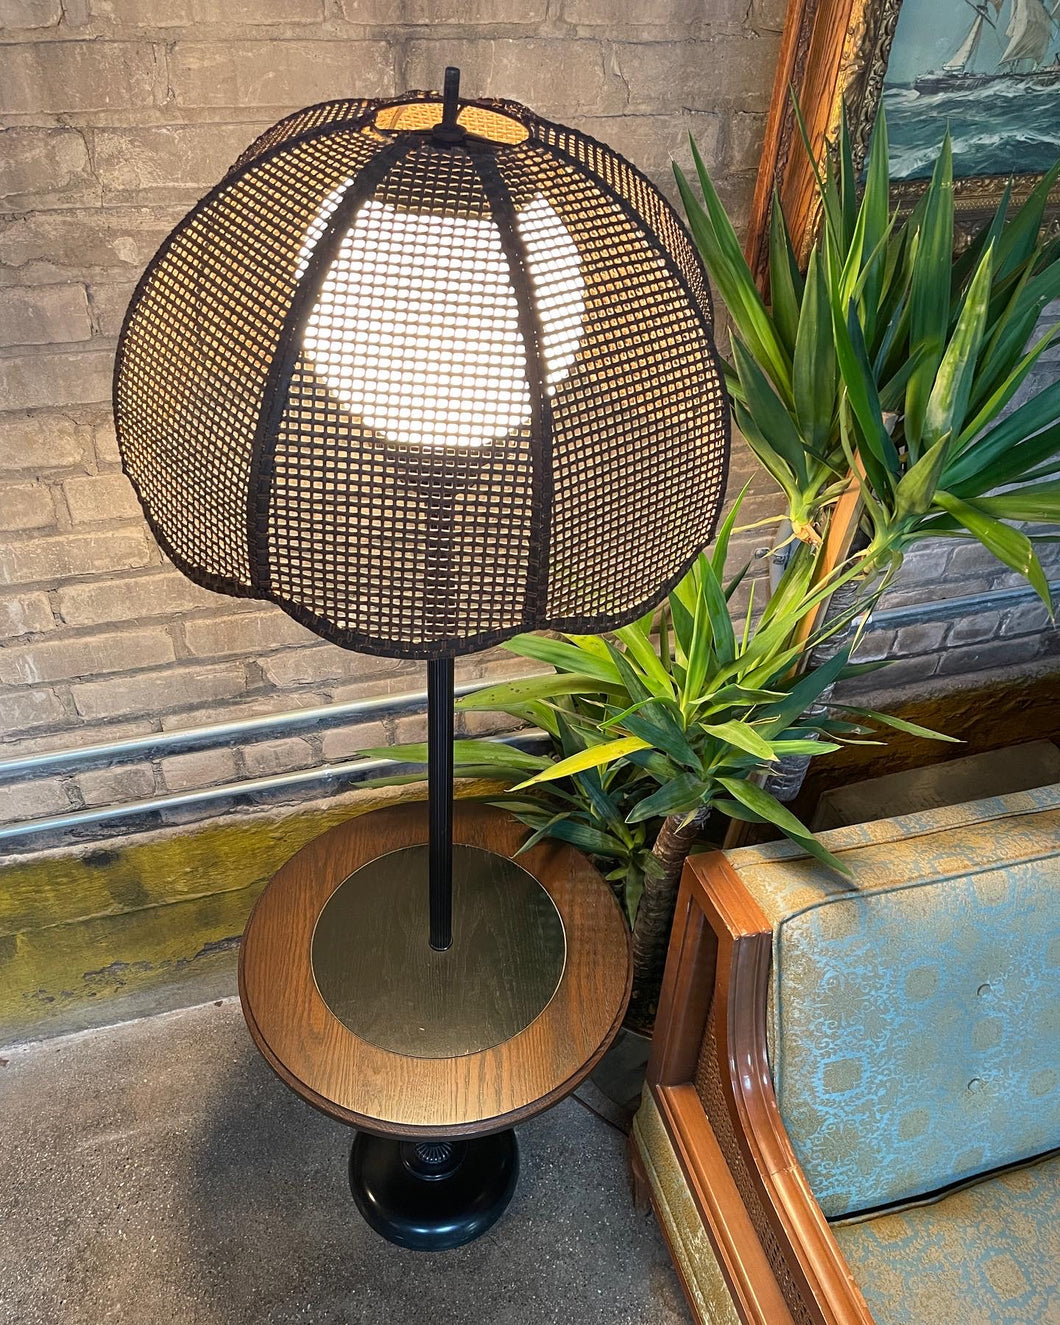 Caned Shade Table Lamp